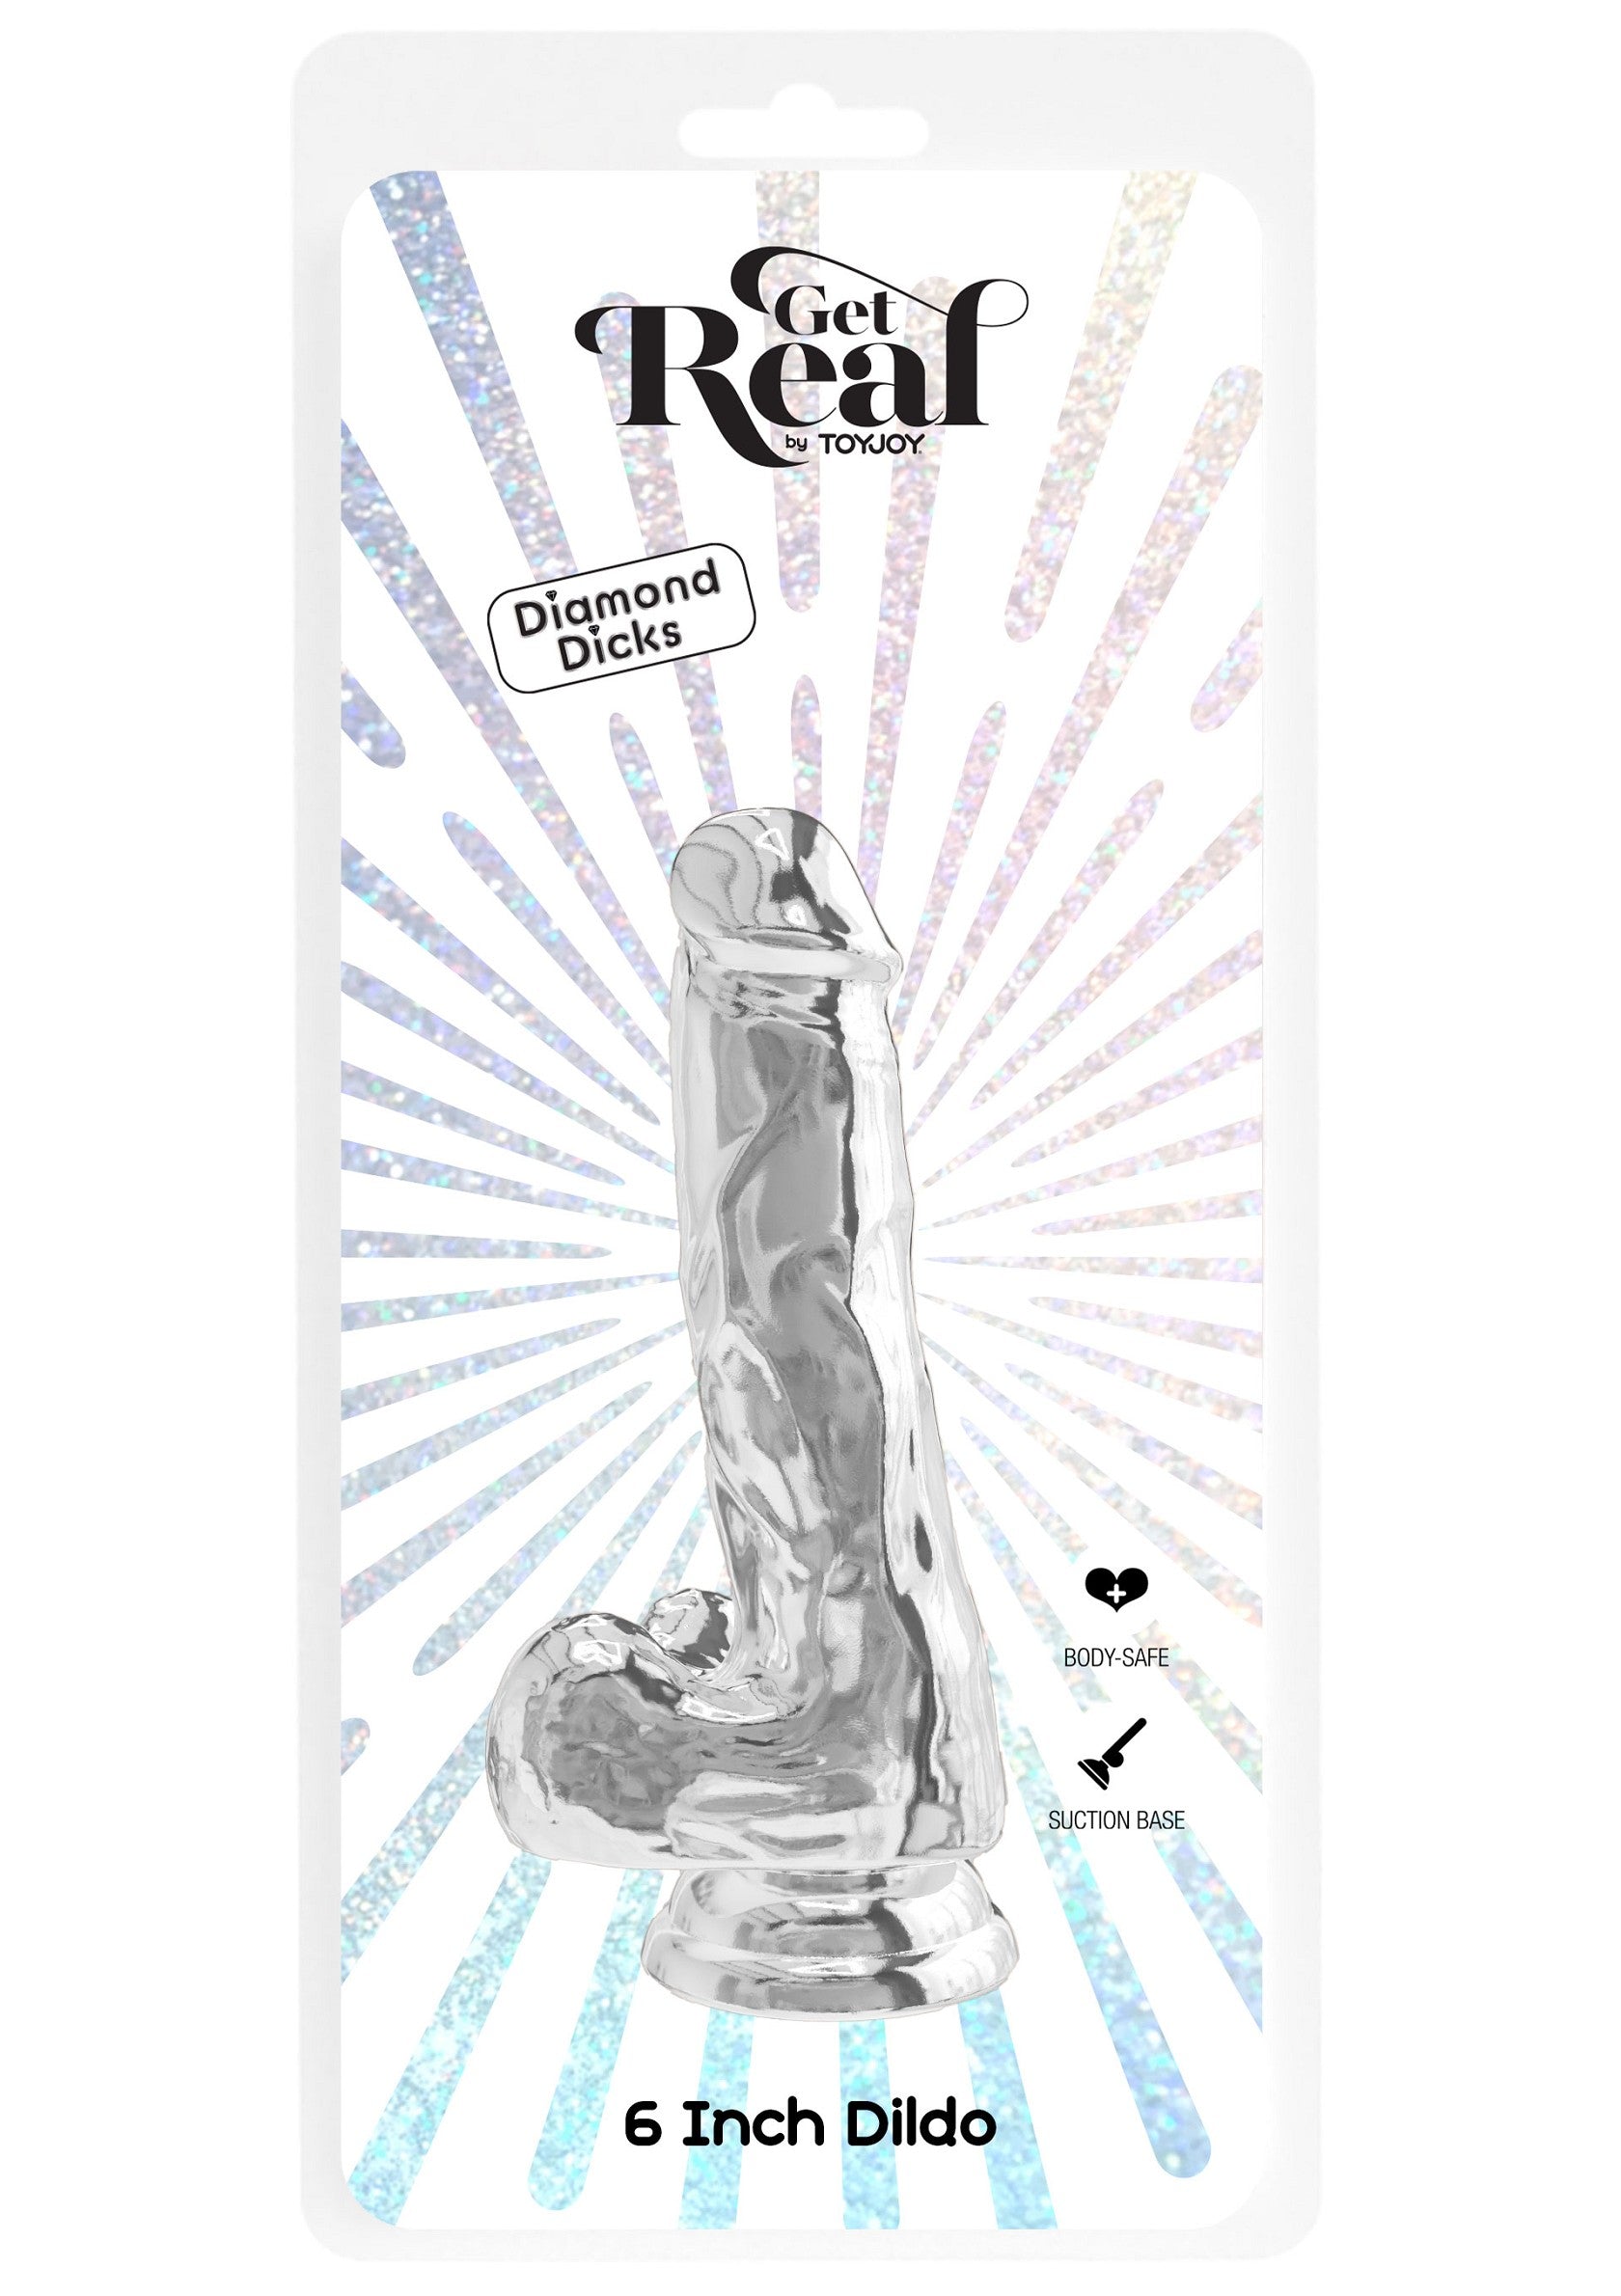 ToyJoy Get Real Clear Dildo with Balls 6' TRANSPA - 2